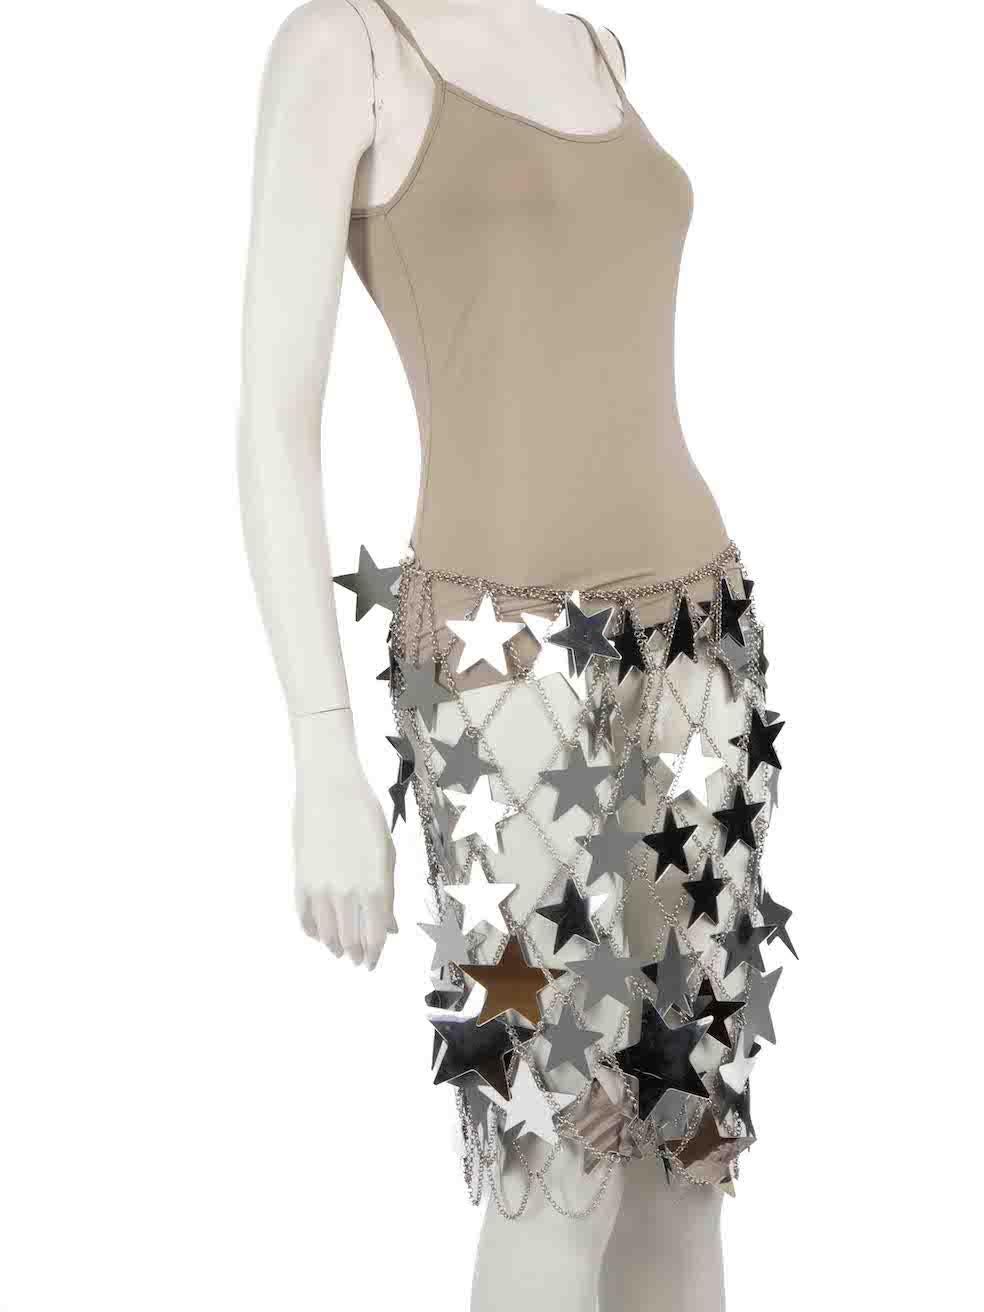 CONDITION is Good. General wear to skirt is evident. Some scratches to the individual stars and a chip to the a star corner near to the right side hem on this used Paco Rabanne designer resale item.
 
 Details
 Silver
 Star mirror chain
 Skirt
